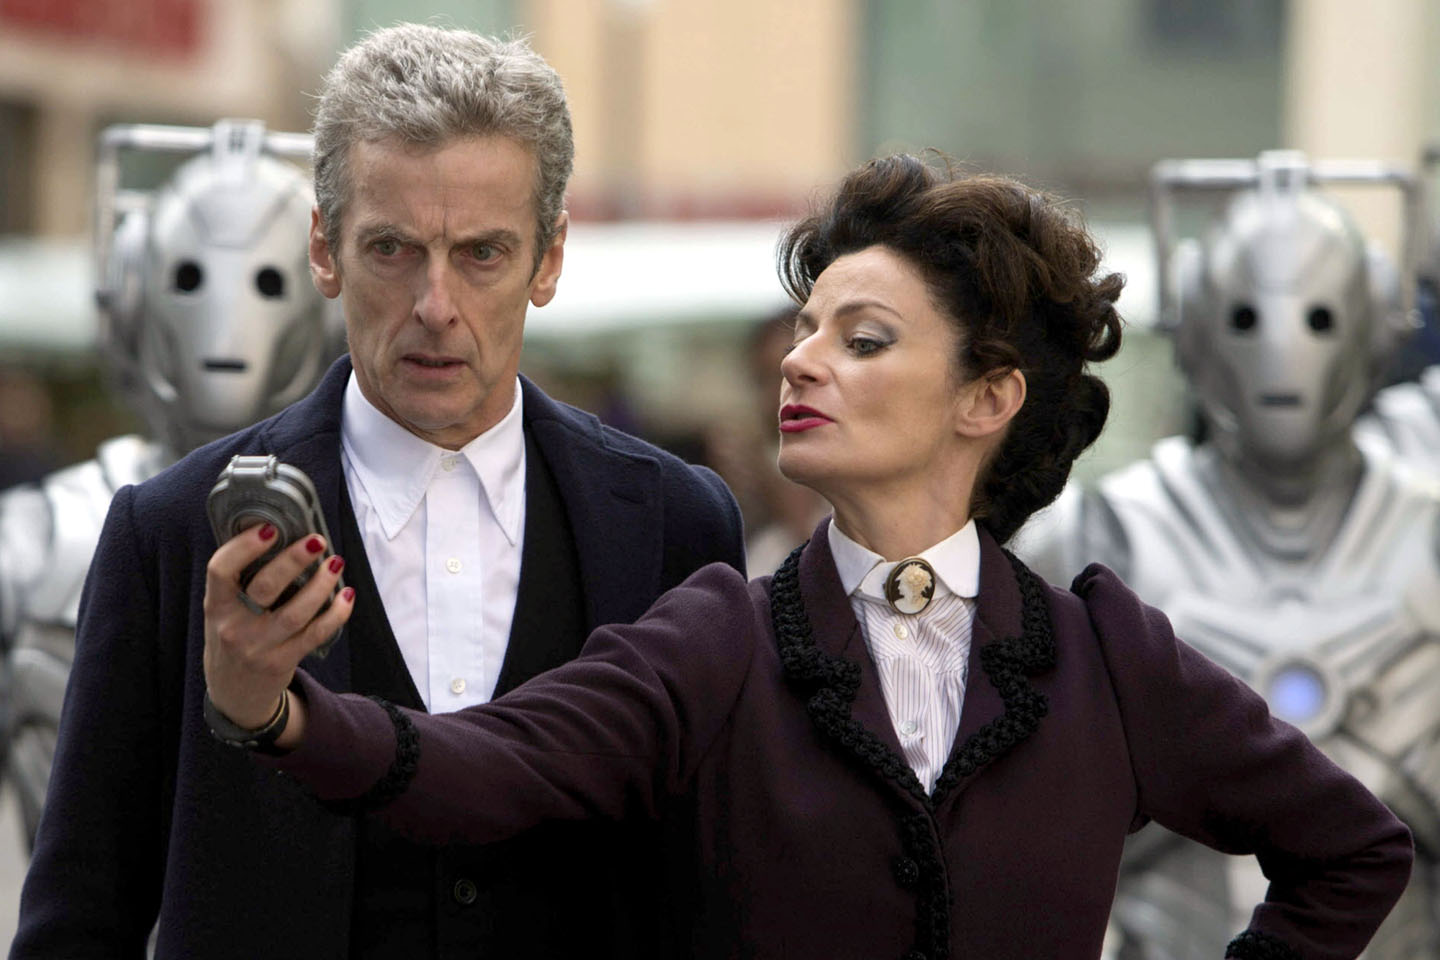 Doctor Who (series 8) ep 12